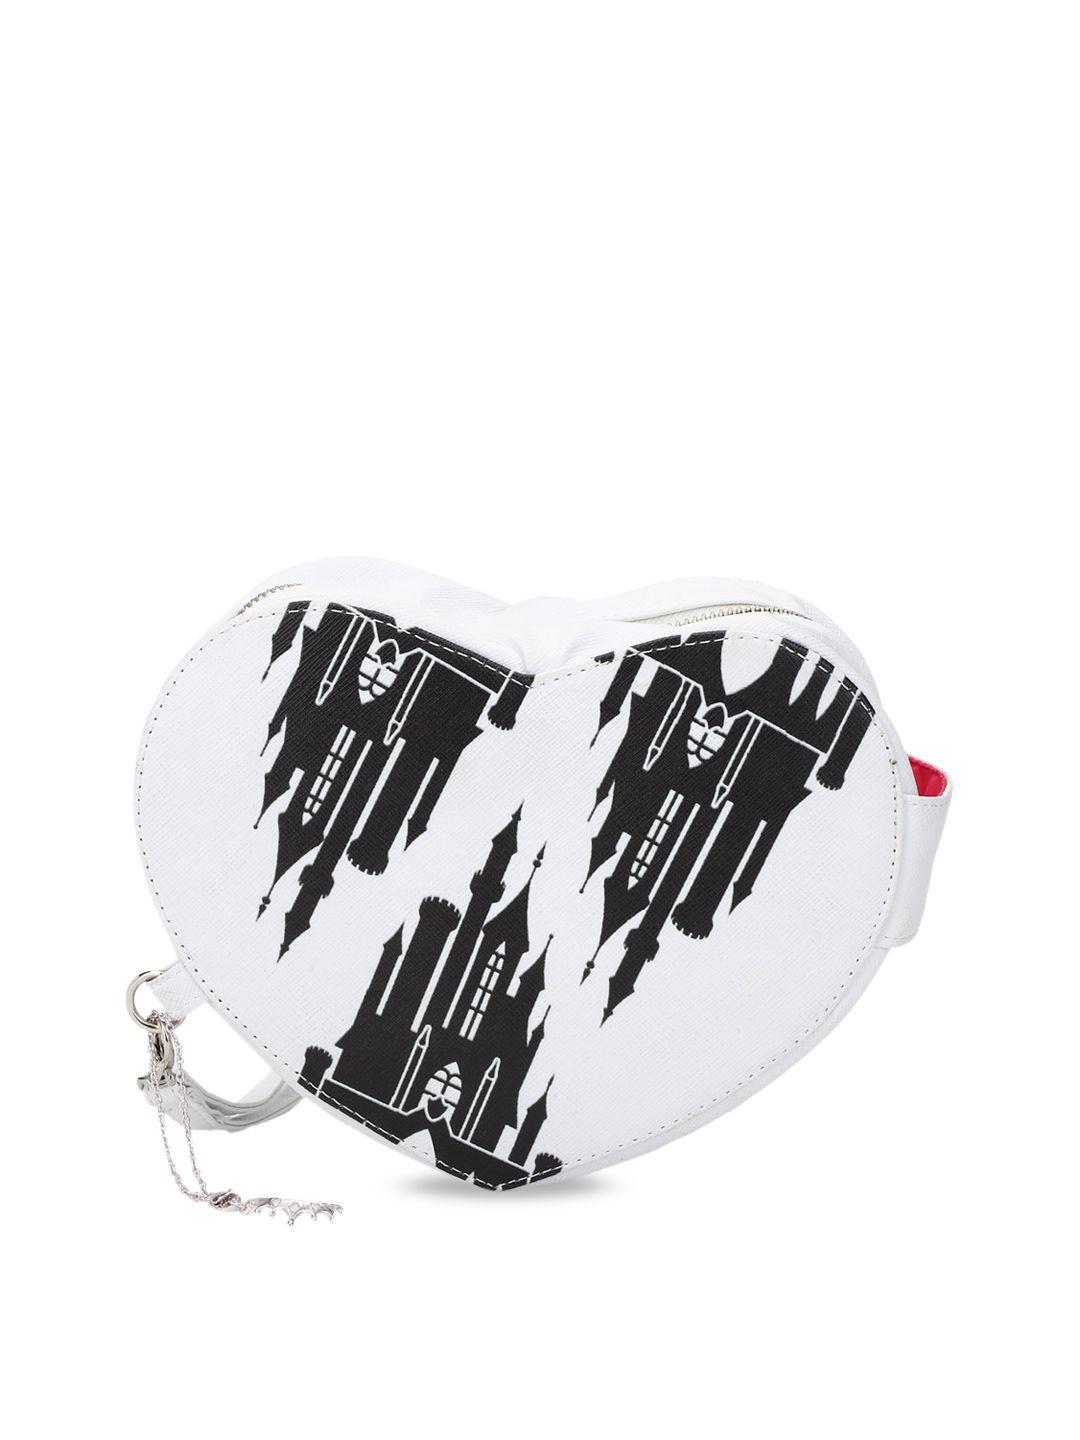 forever 21 white & black printed purse clutch